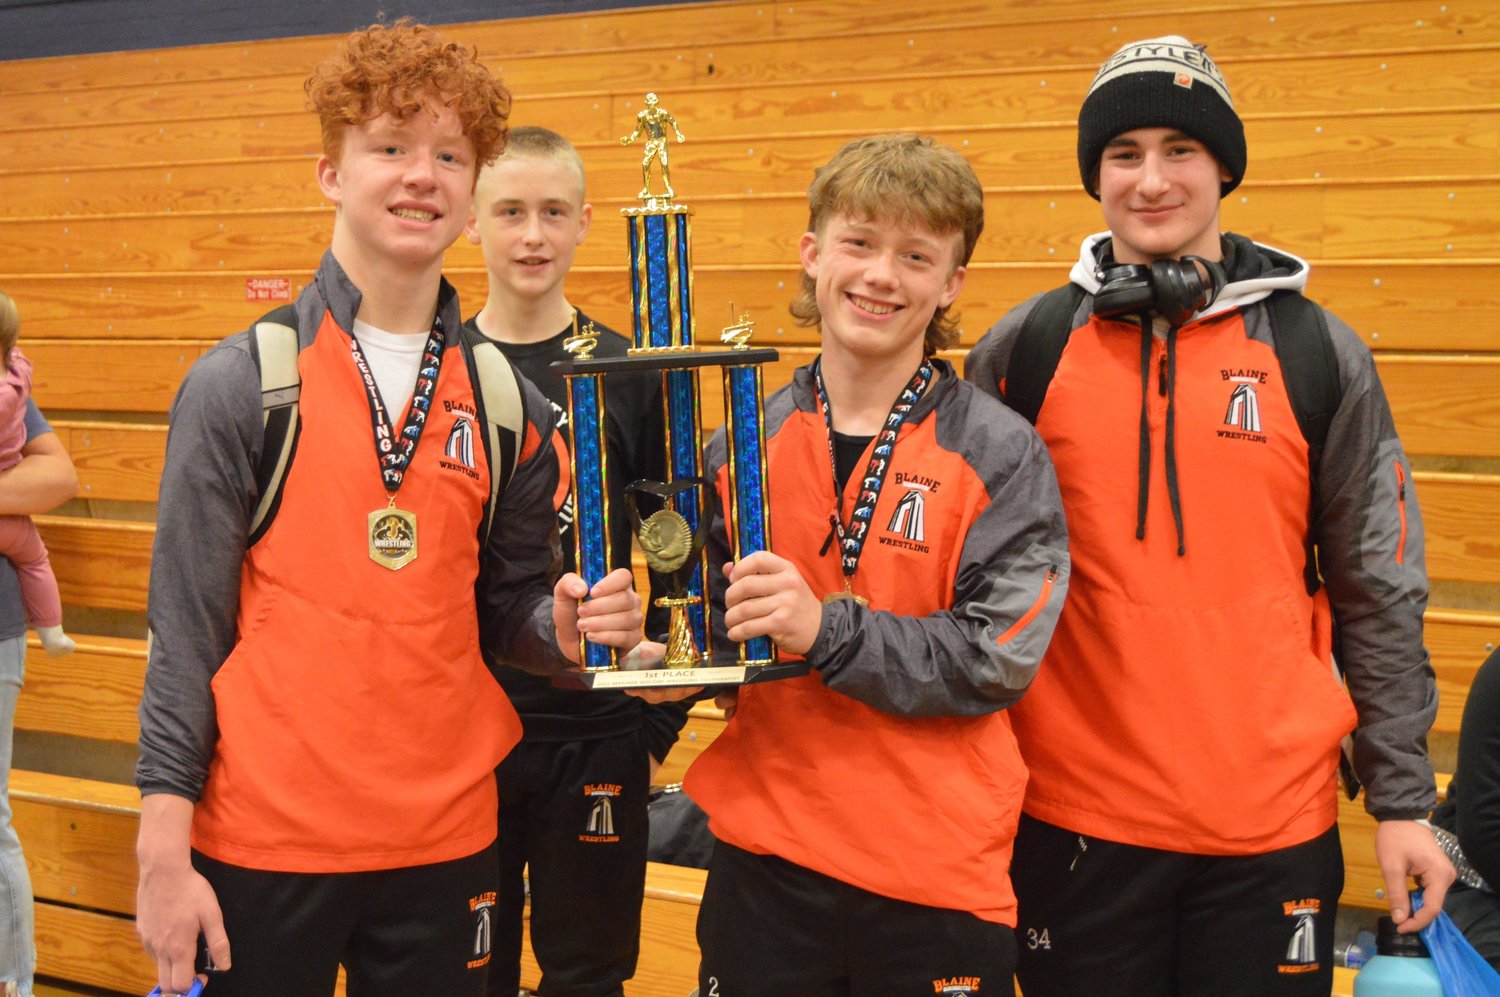 Blaine boys wrestling won the team competition at the Mariner Holiday wrestling tournament December 3 in Everett, finishing with 195 points. Four wrestlers won their respective weight classes. From l.; Thomas Cox, Hugo Vekved, Cael Button and Jackson Veals.